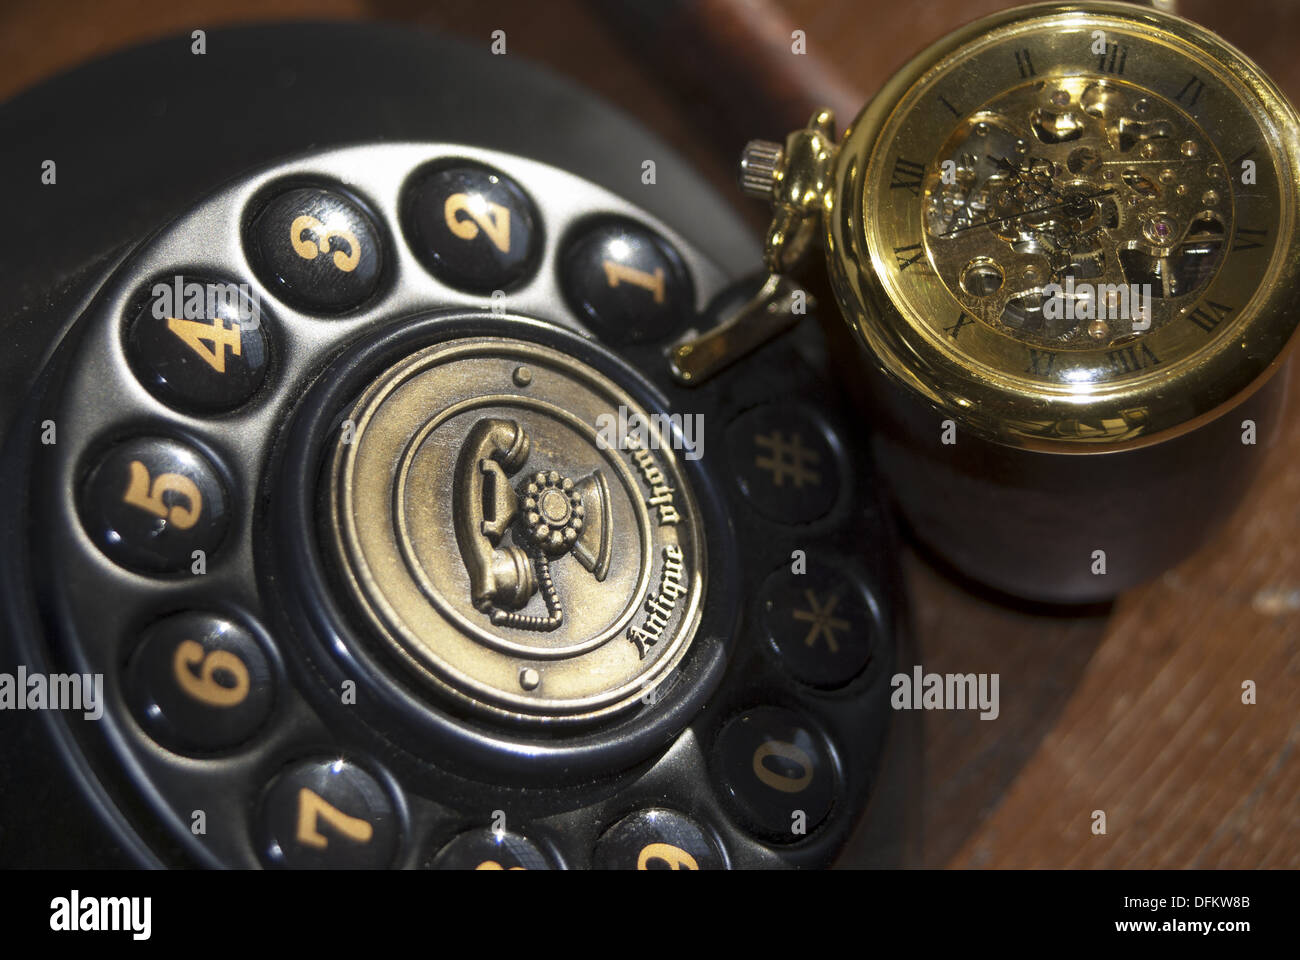 Vintage: some old objects. An old watch and a telephone Stock Photo